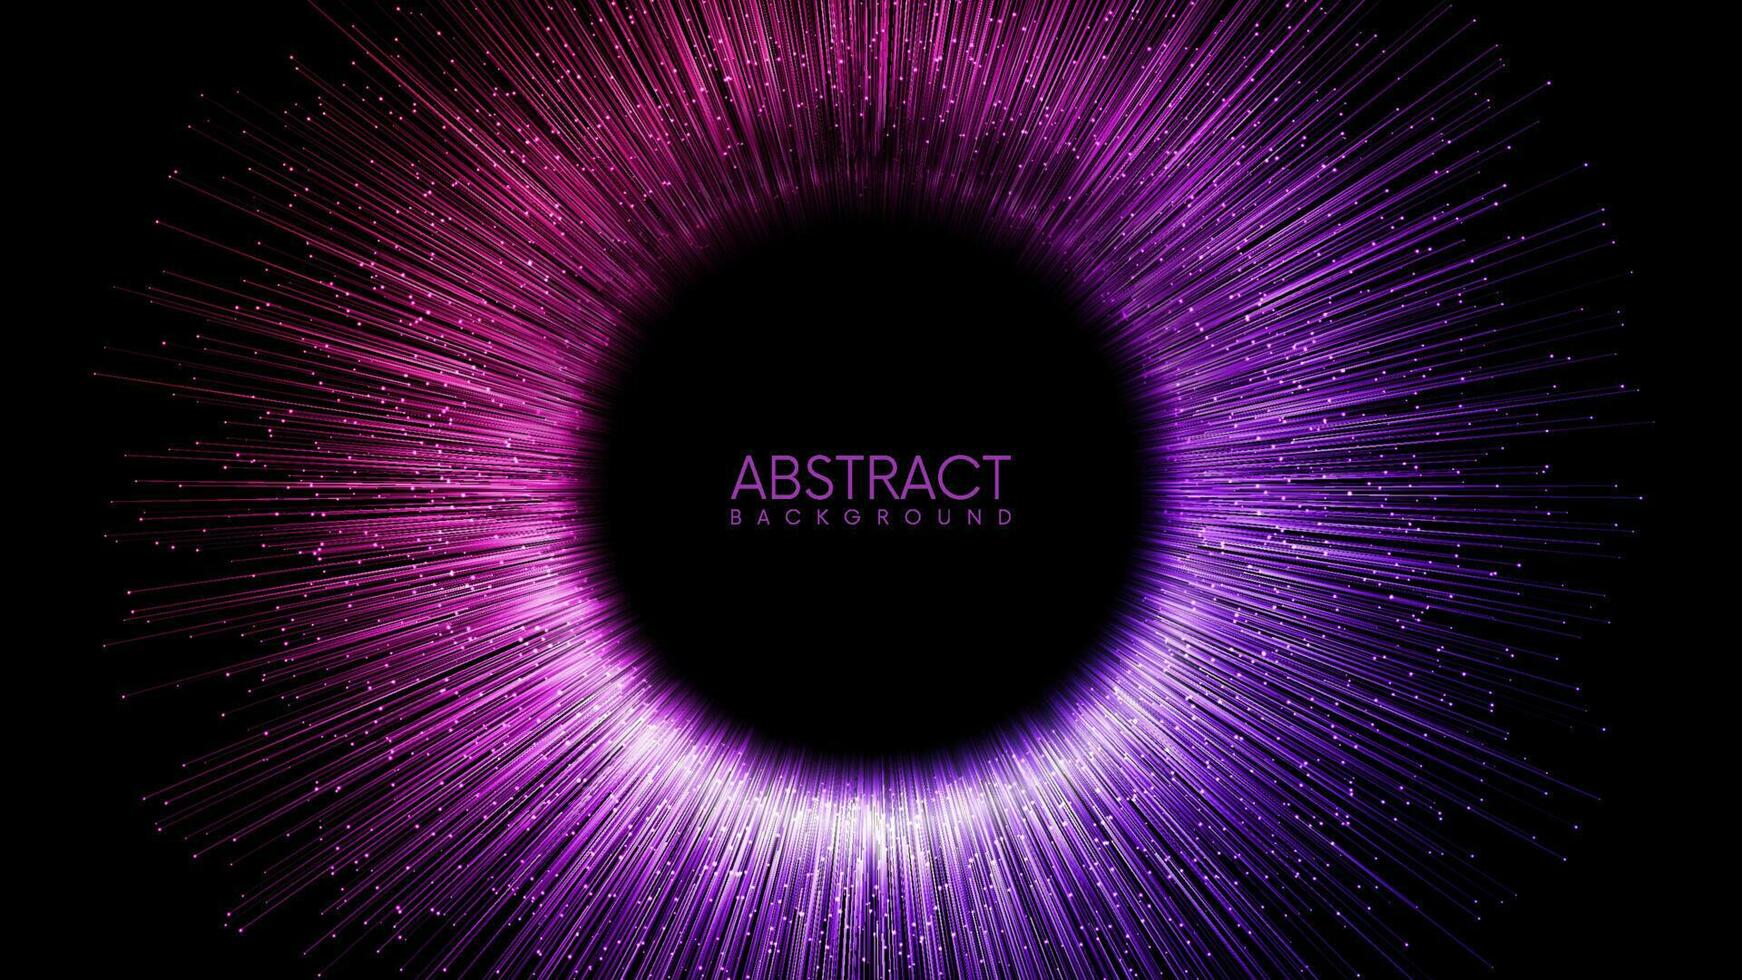 Rays or lines with glowing particles fly out of black hole. Abstract vector background with place for your content. Easy to change colors  streaks with glowing sparkling particles.